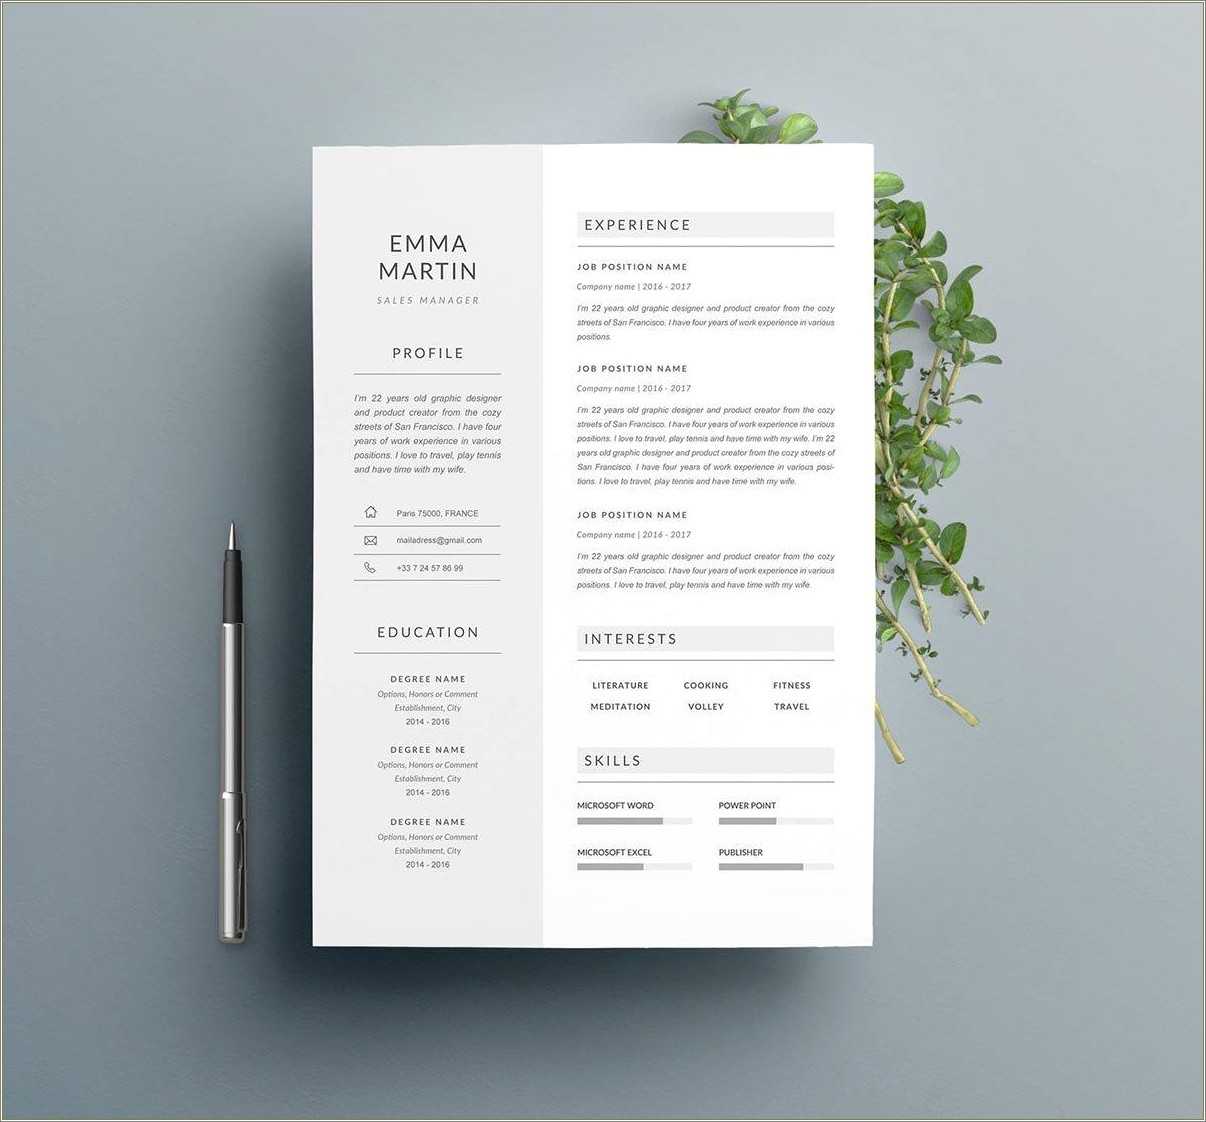 Adobe Indesign Resume Template Free Download Resume Example Gallery